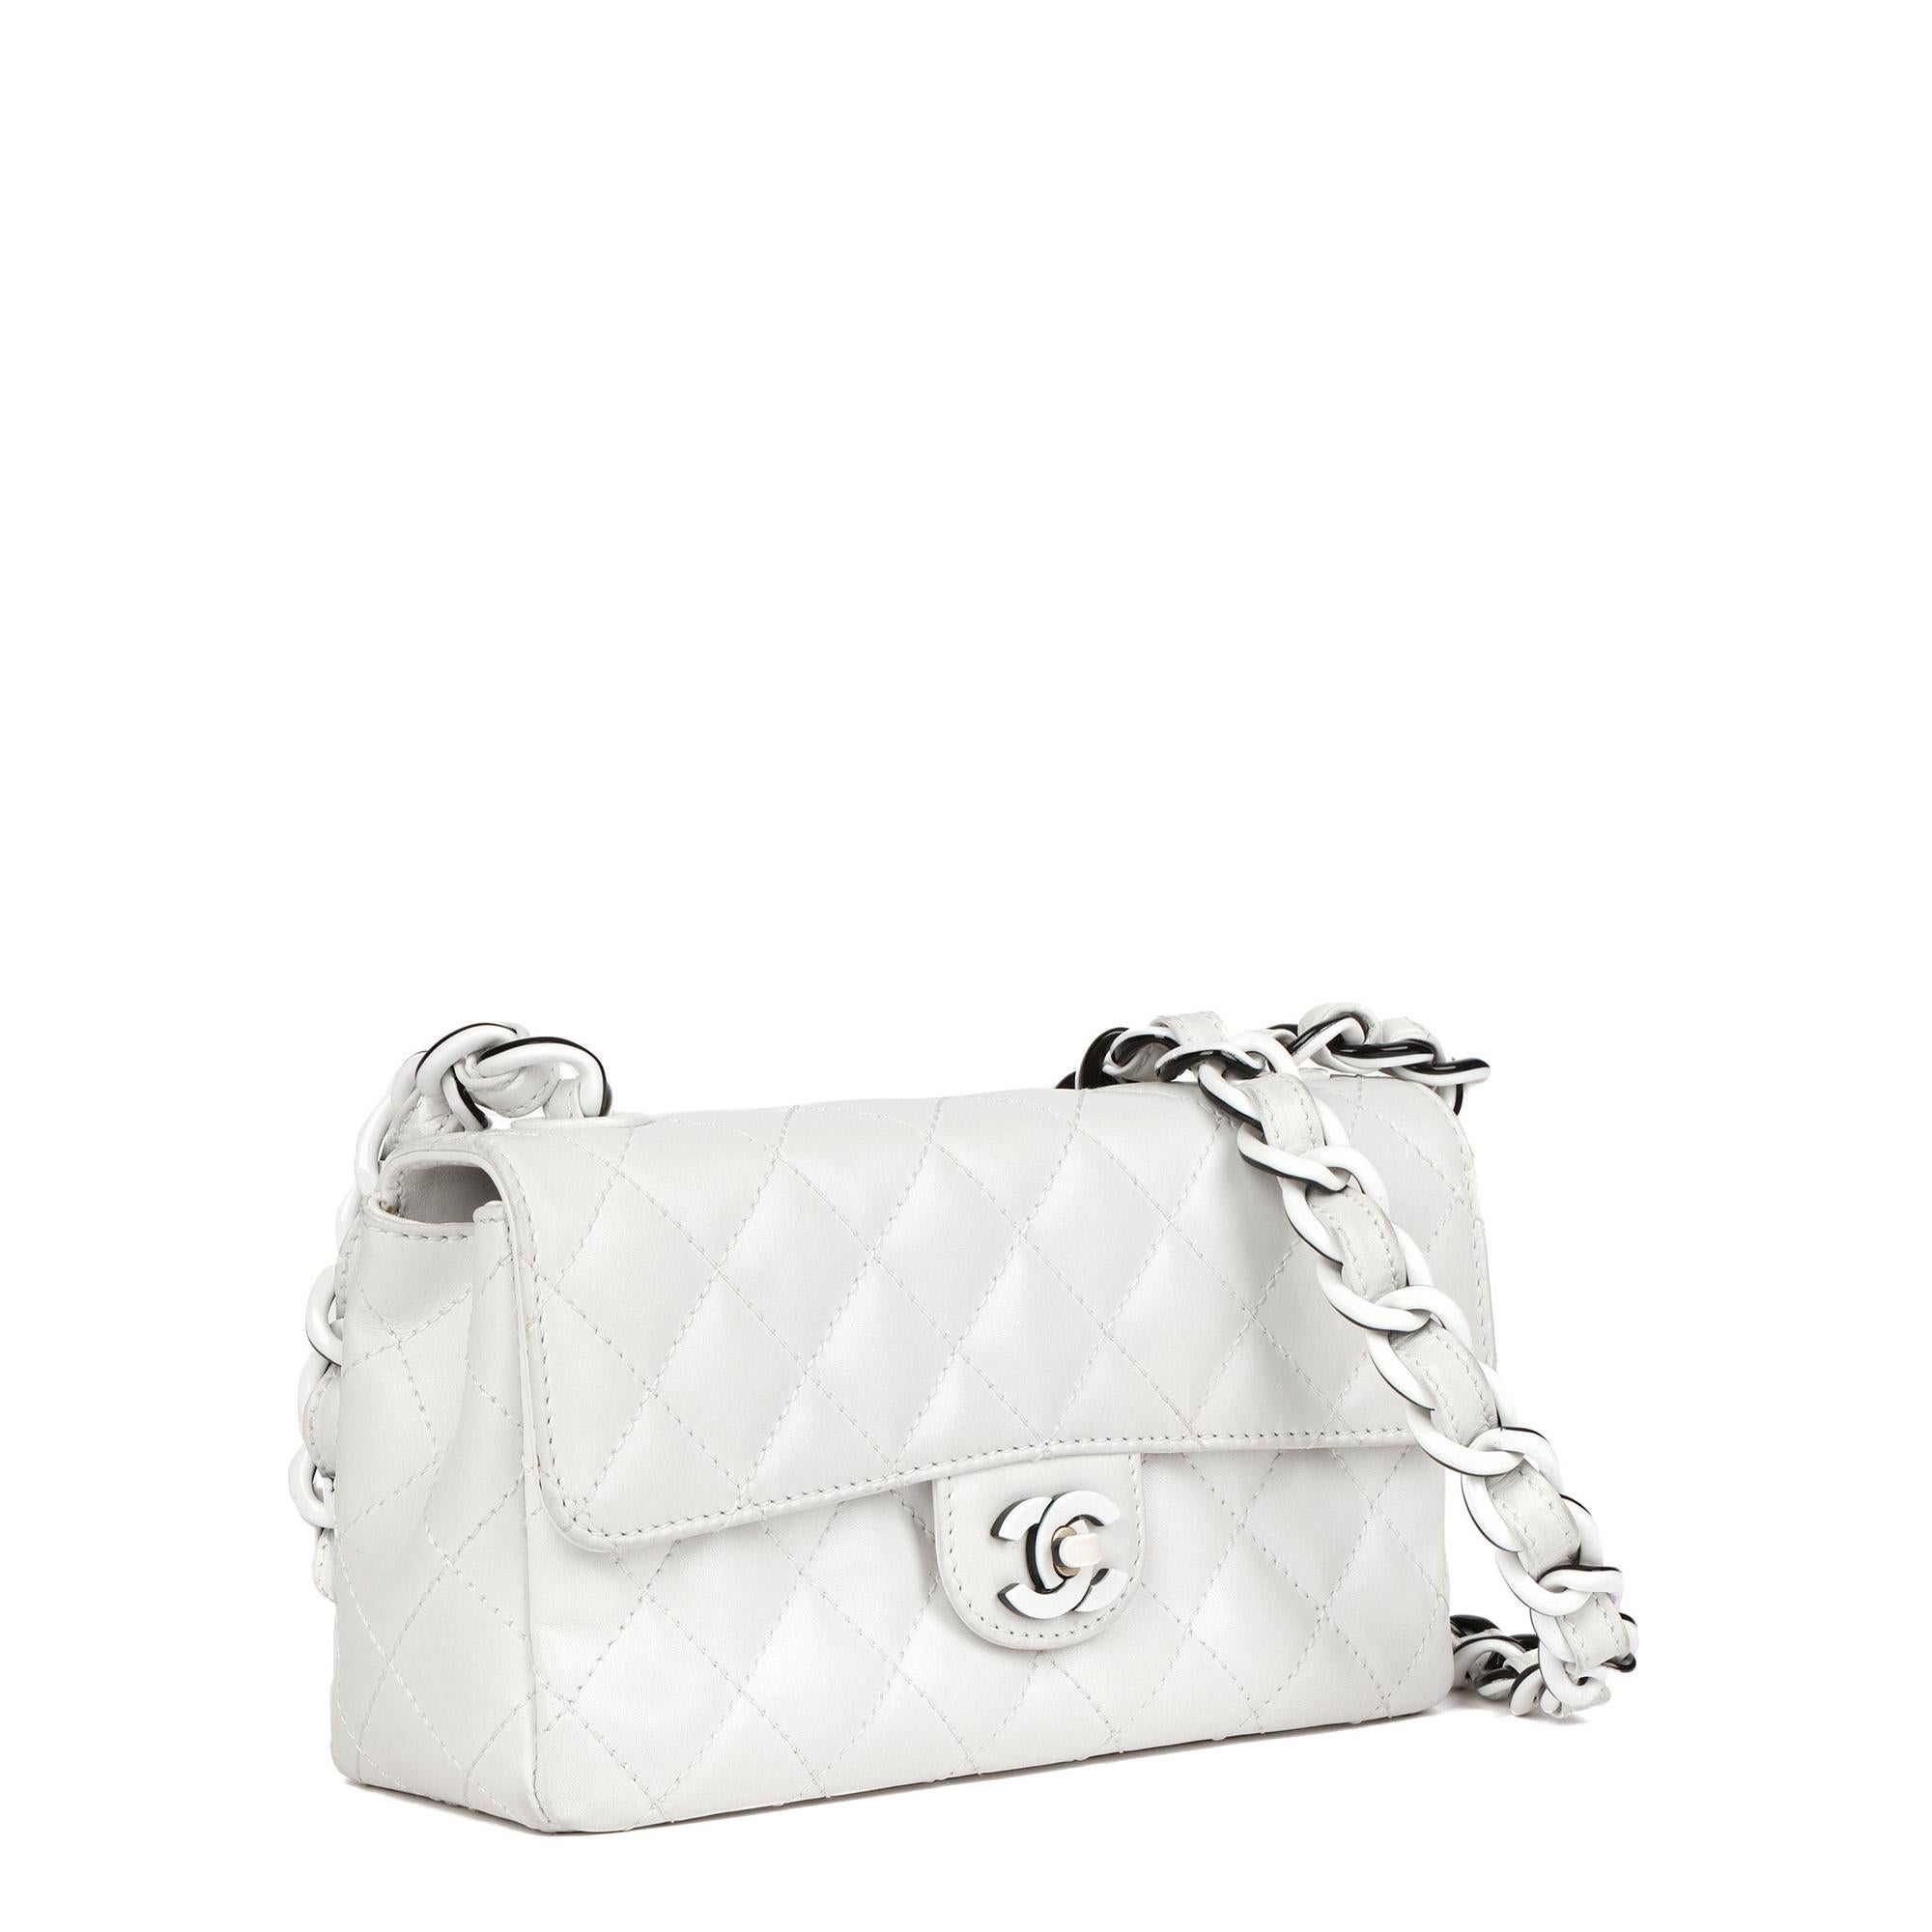 CHANEL
White Quilted Lambskin Vintage Mini Classic Single Flap Bag

Xupes Reference: HB4589
Serial Number: 6604671
Age (Circa): 2000
Accompanied By: Chanel Dust Bag, Care Booklet, Authenticity Card
Authenticity Details: Authenticity Card, Serial